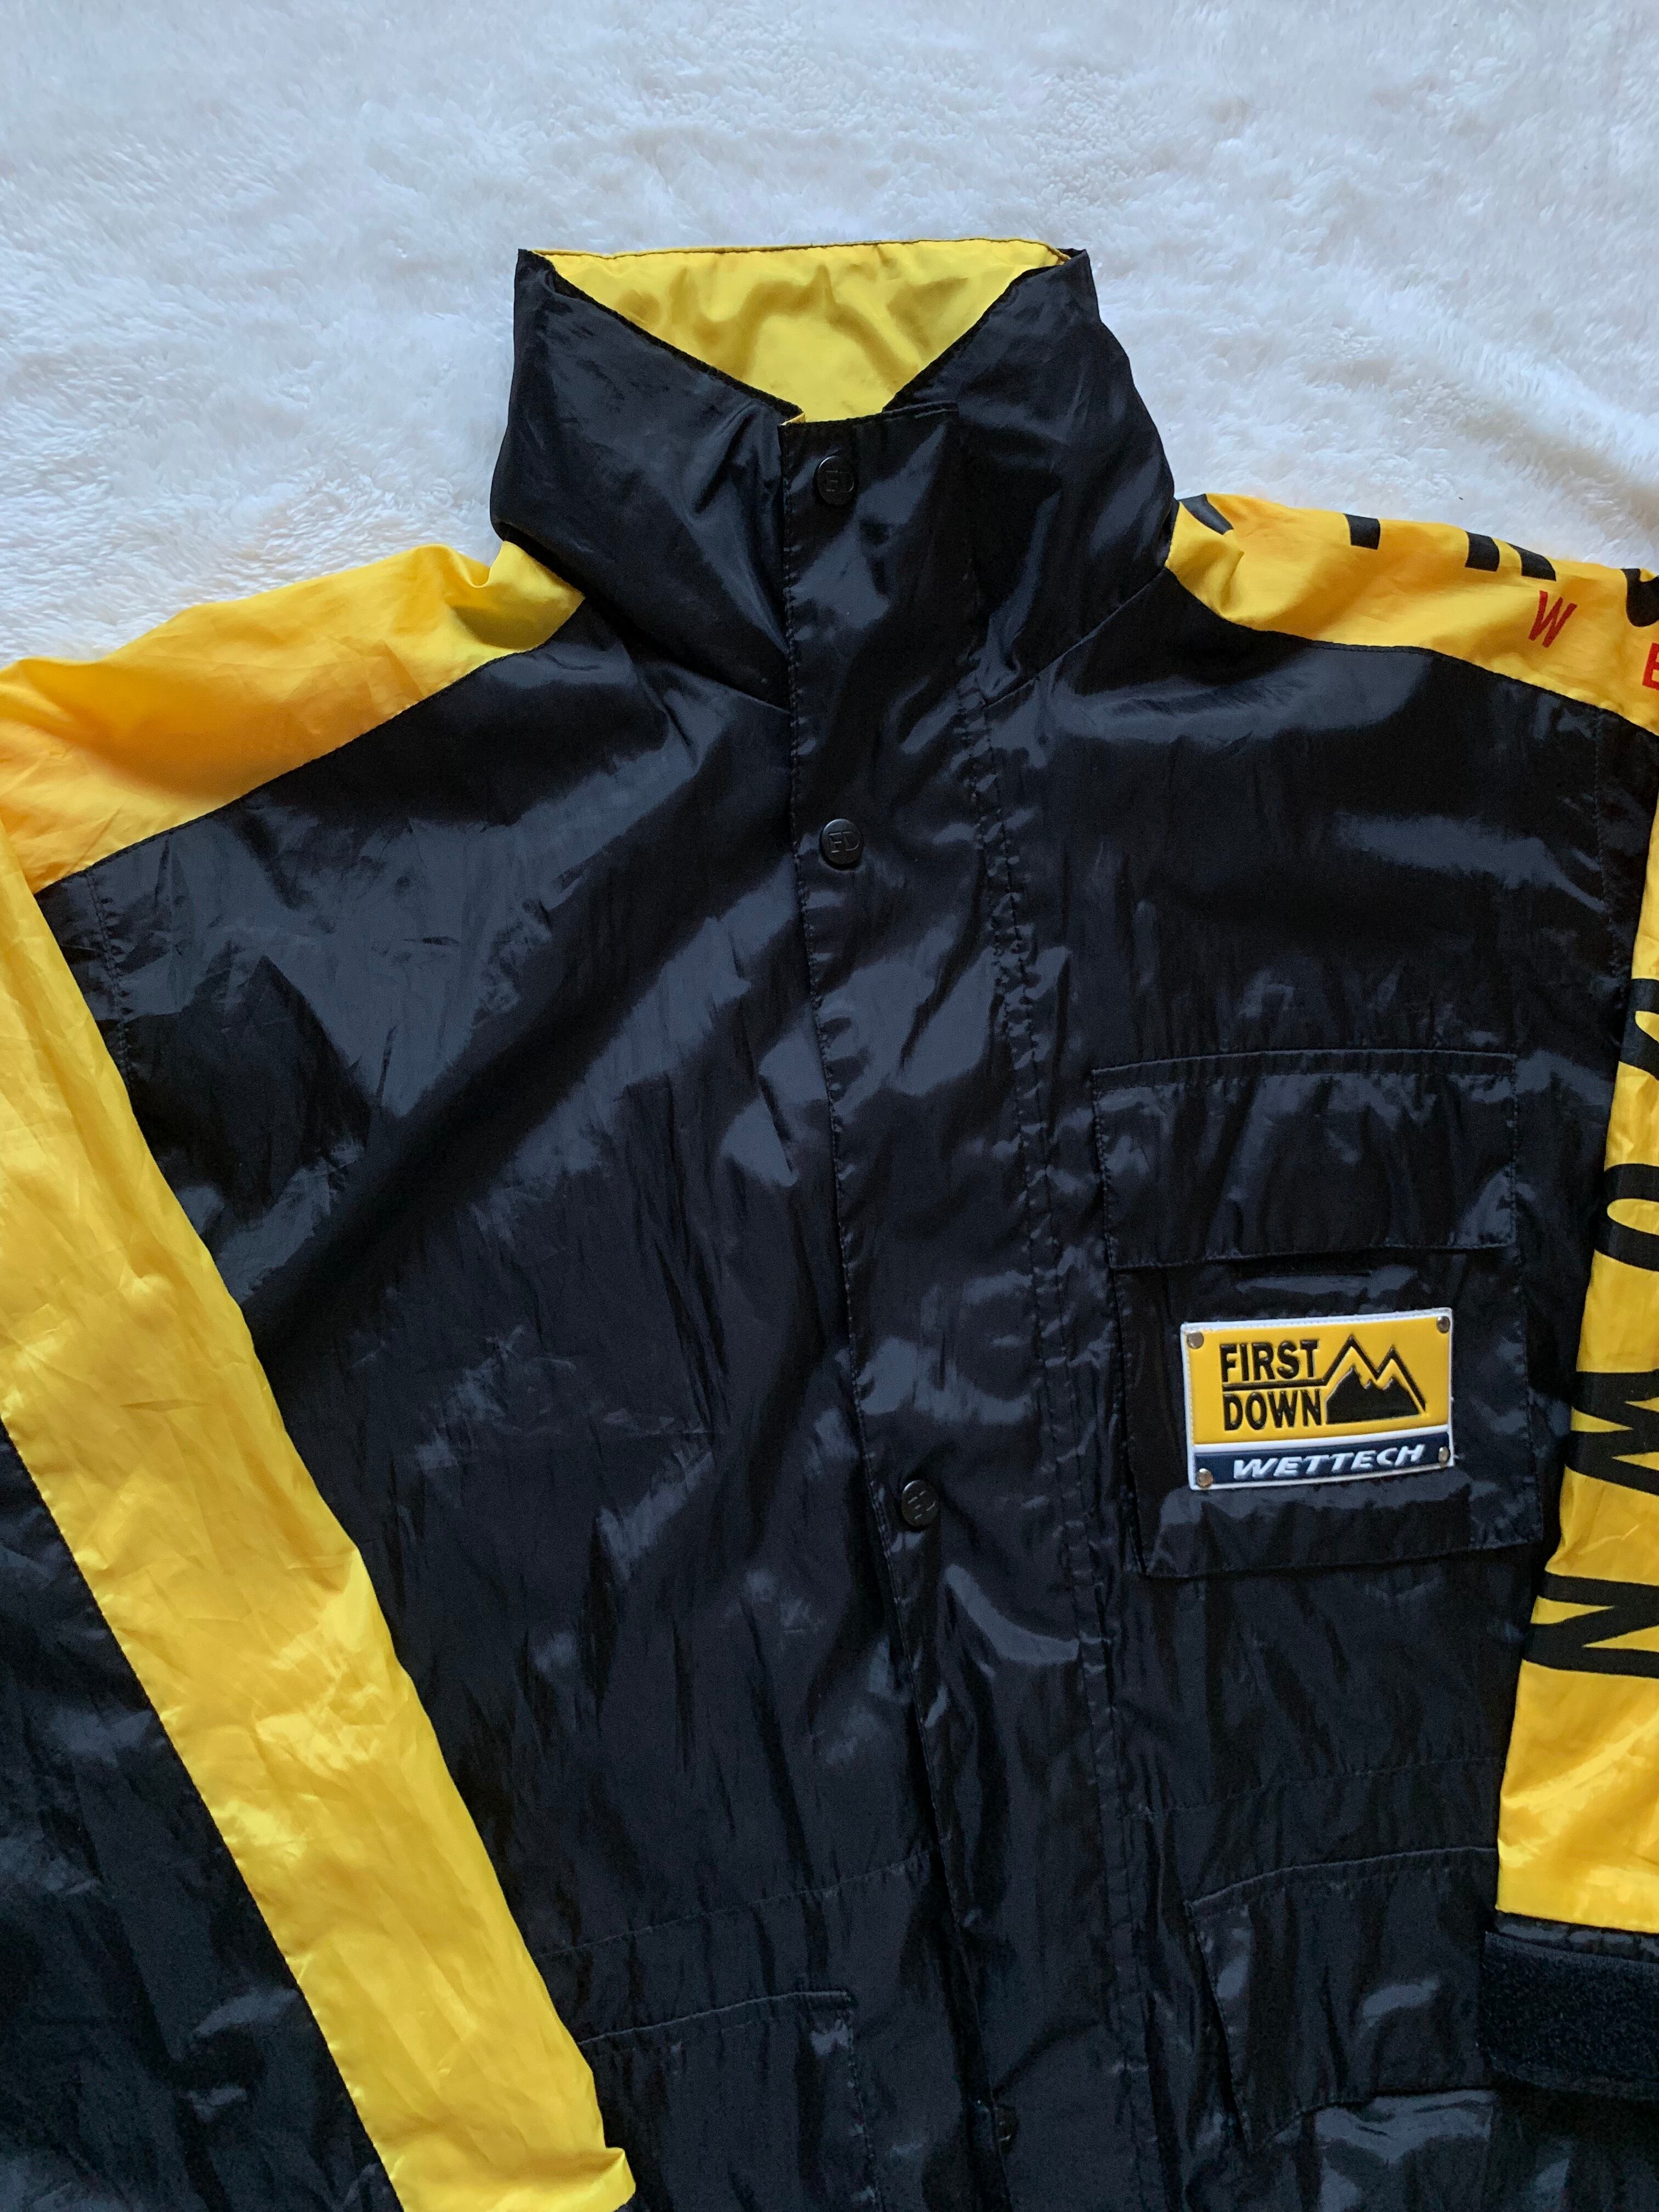 s First Down WET TECH Sailing Jacket   Used & Vintage Clothing